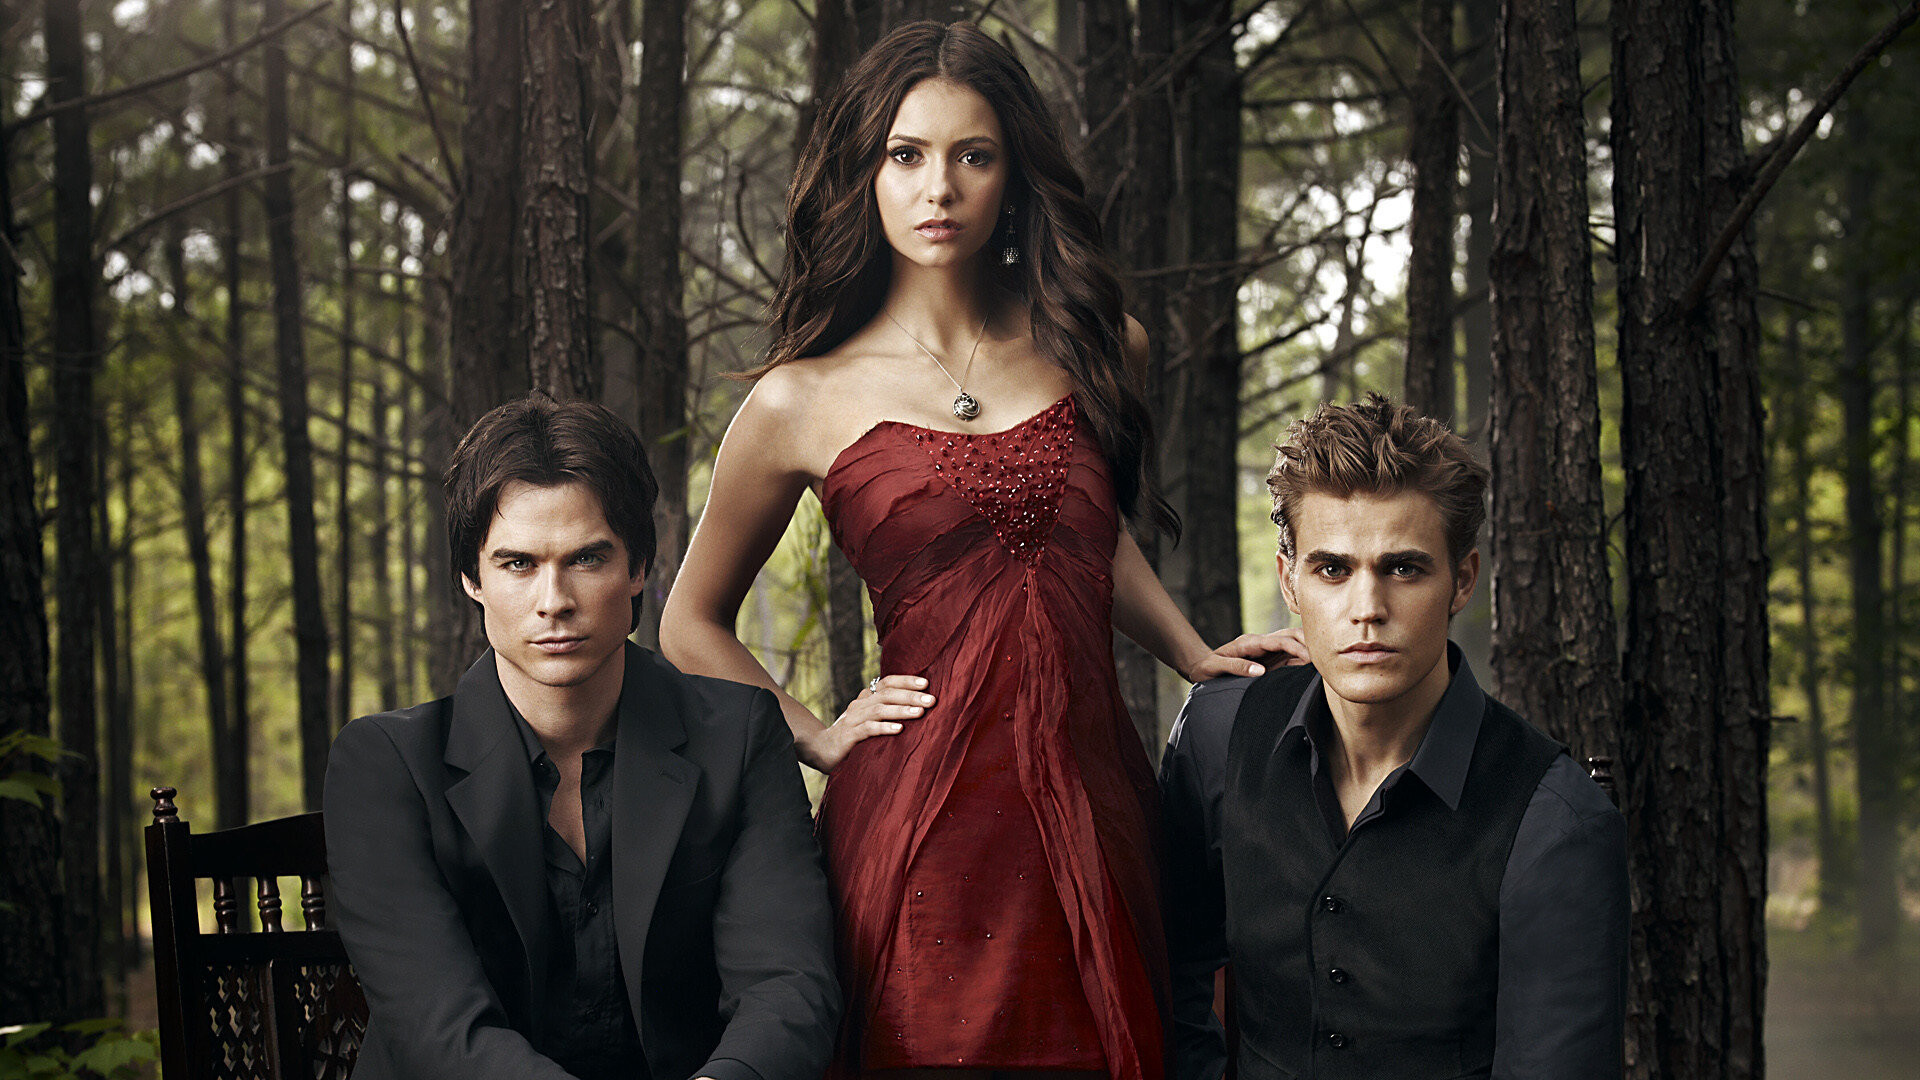 The Vampire Diaries (TV Series): First Season Started In 2009, Mystery Fantasy Drama, Hyperphysical Dark Powers. 1920x1080 Full HD Background.